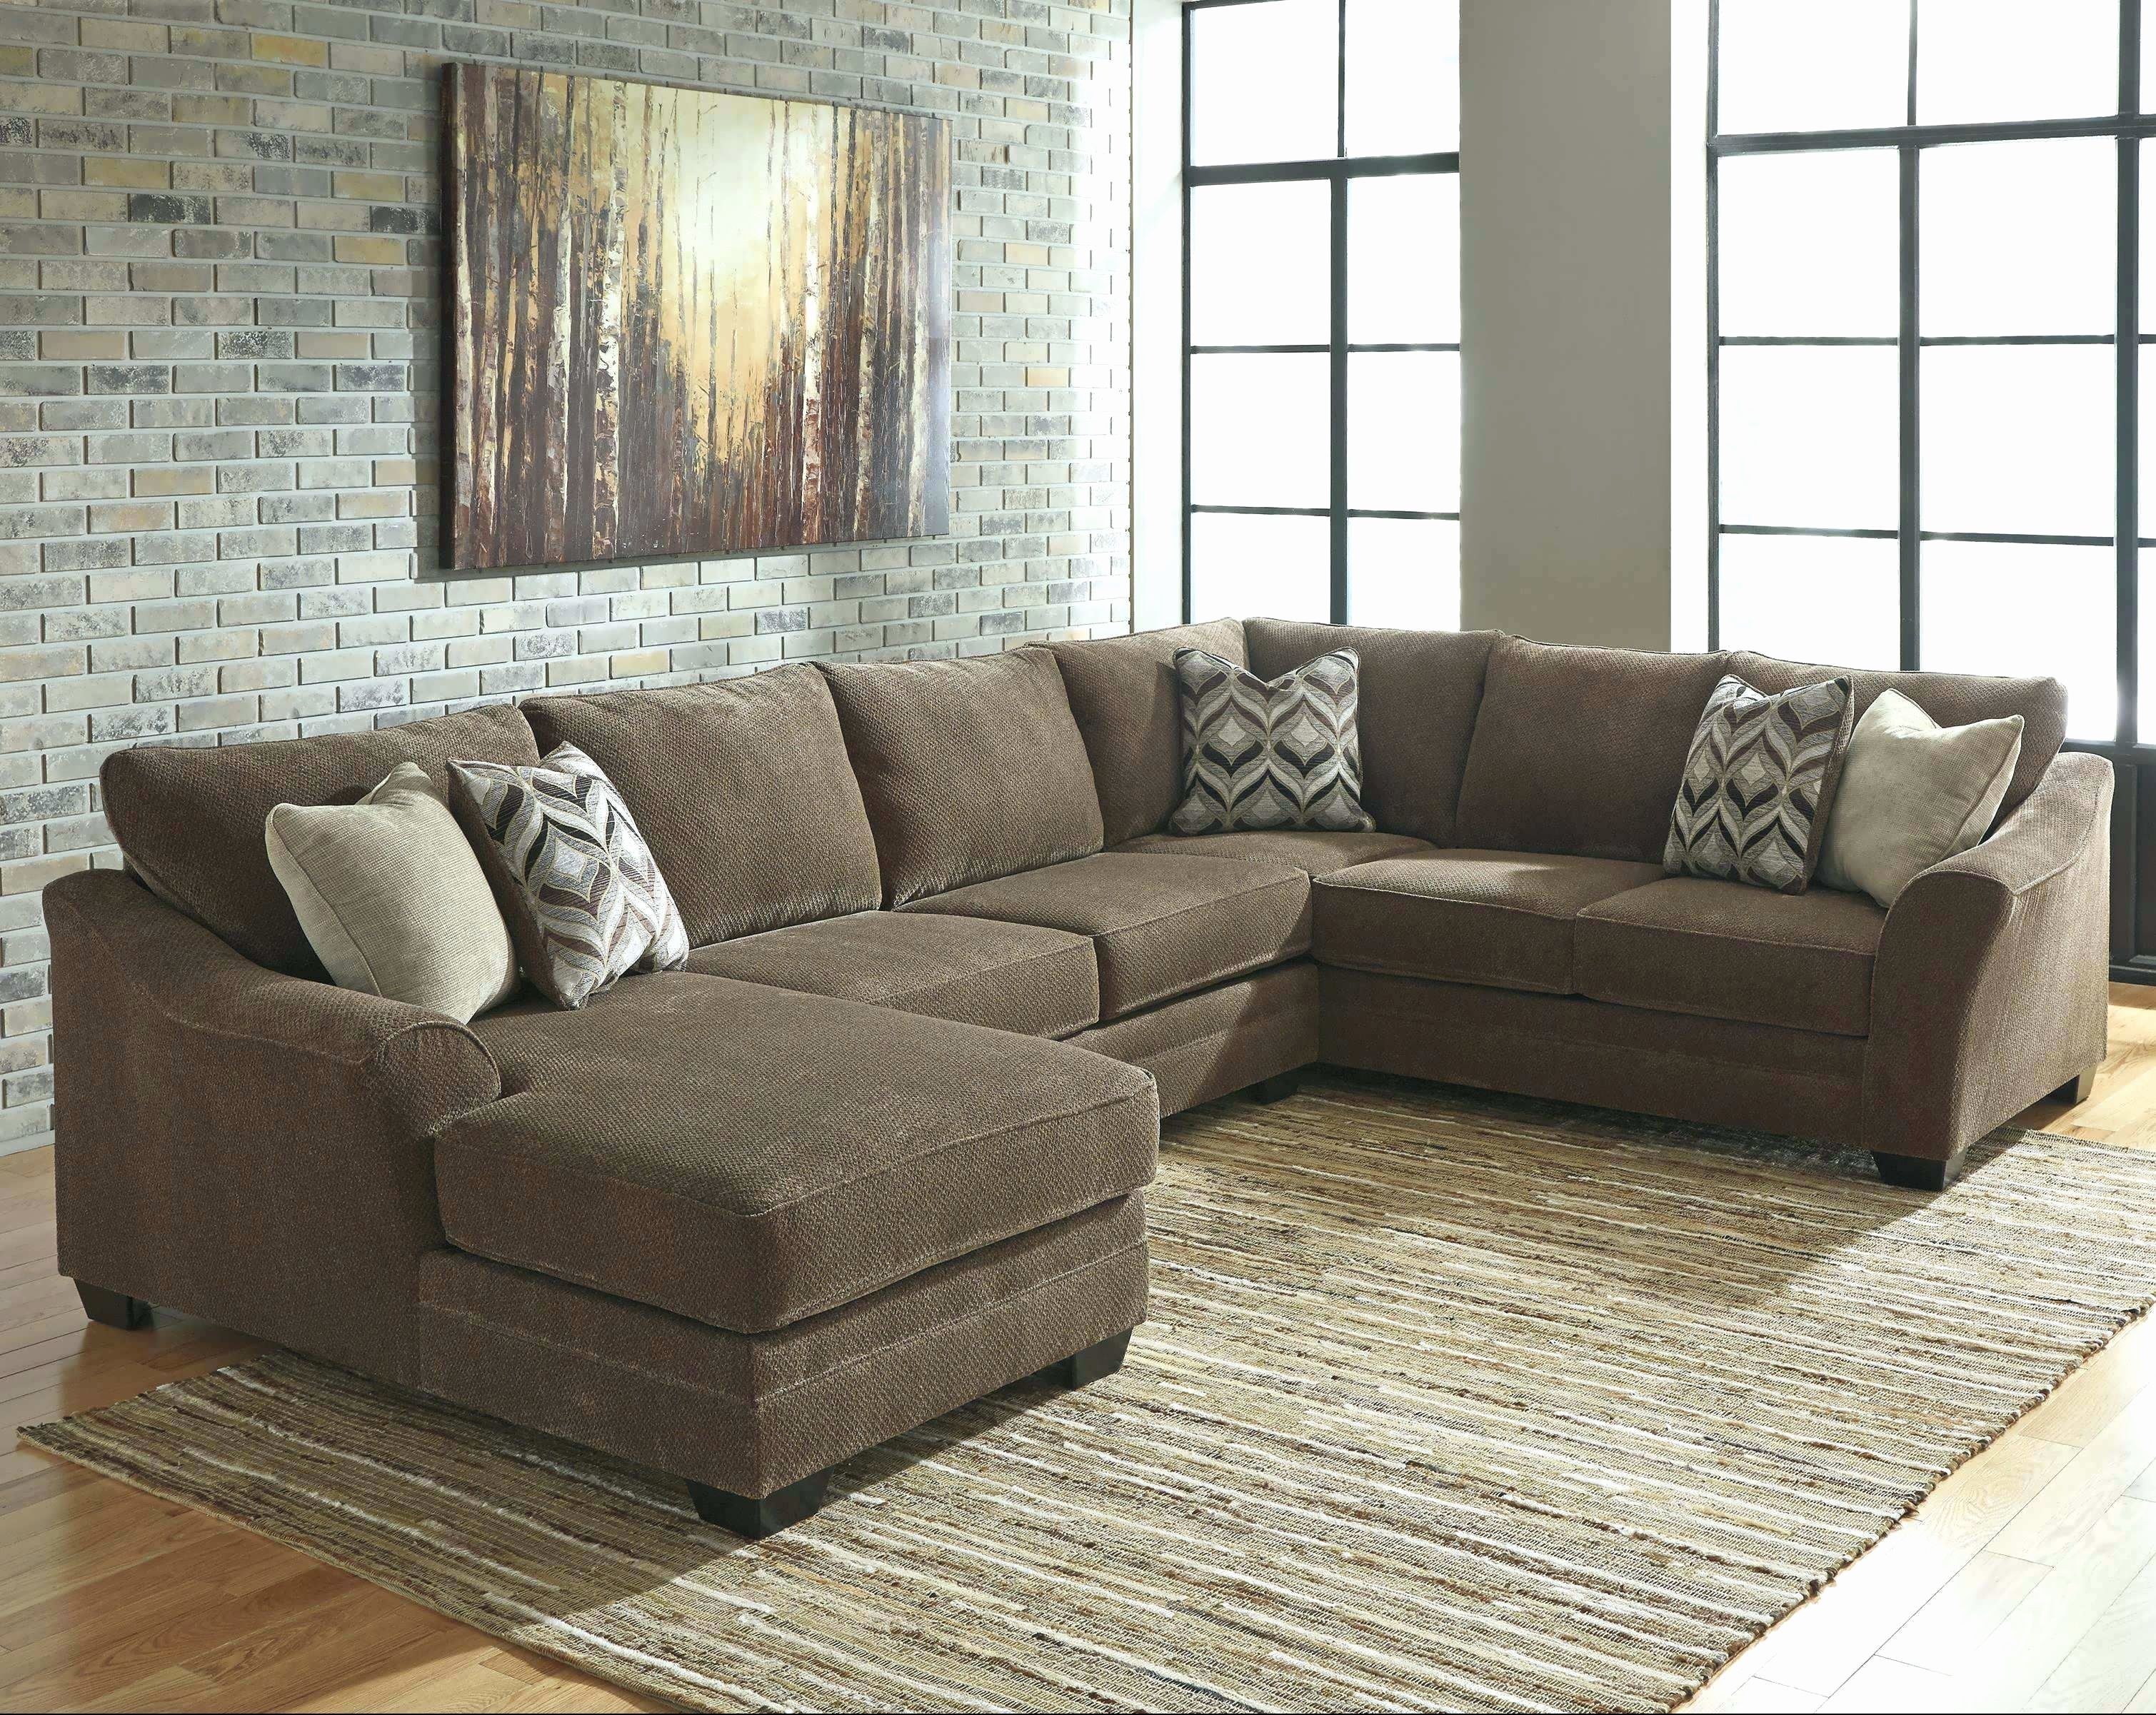 New Sectional Sofas On Sale 2018 – Couches And Sofas Ideas With Canada Sale Sectional Sofas (View 1 of 10)